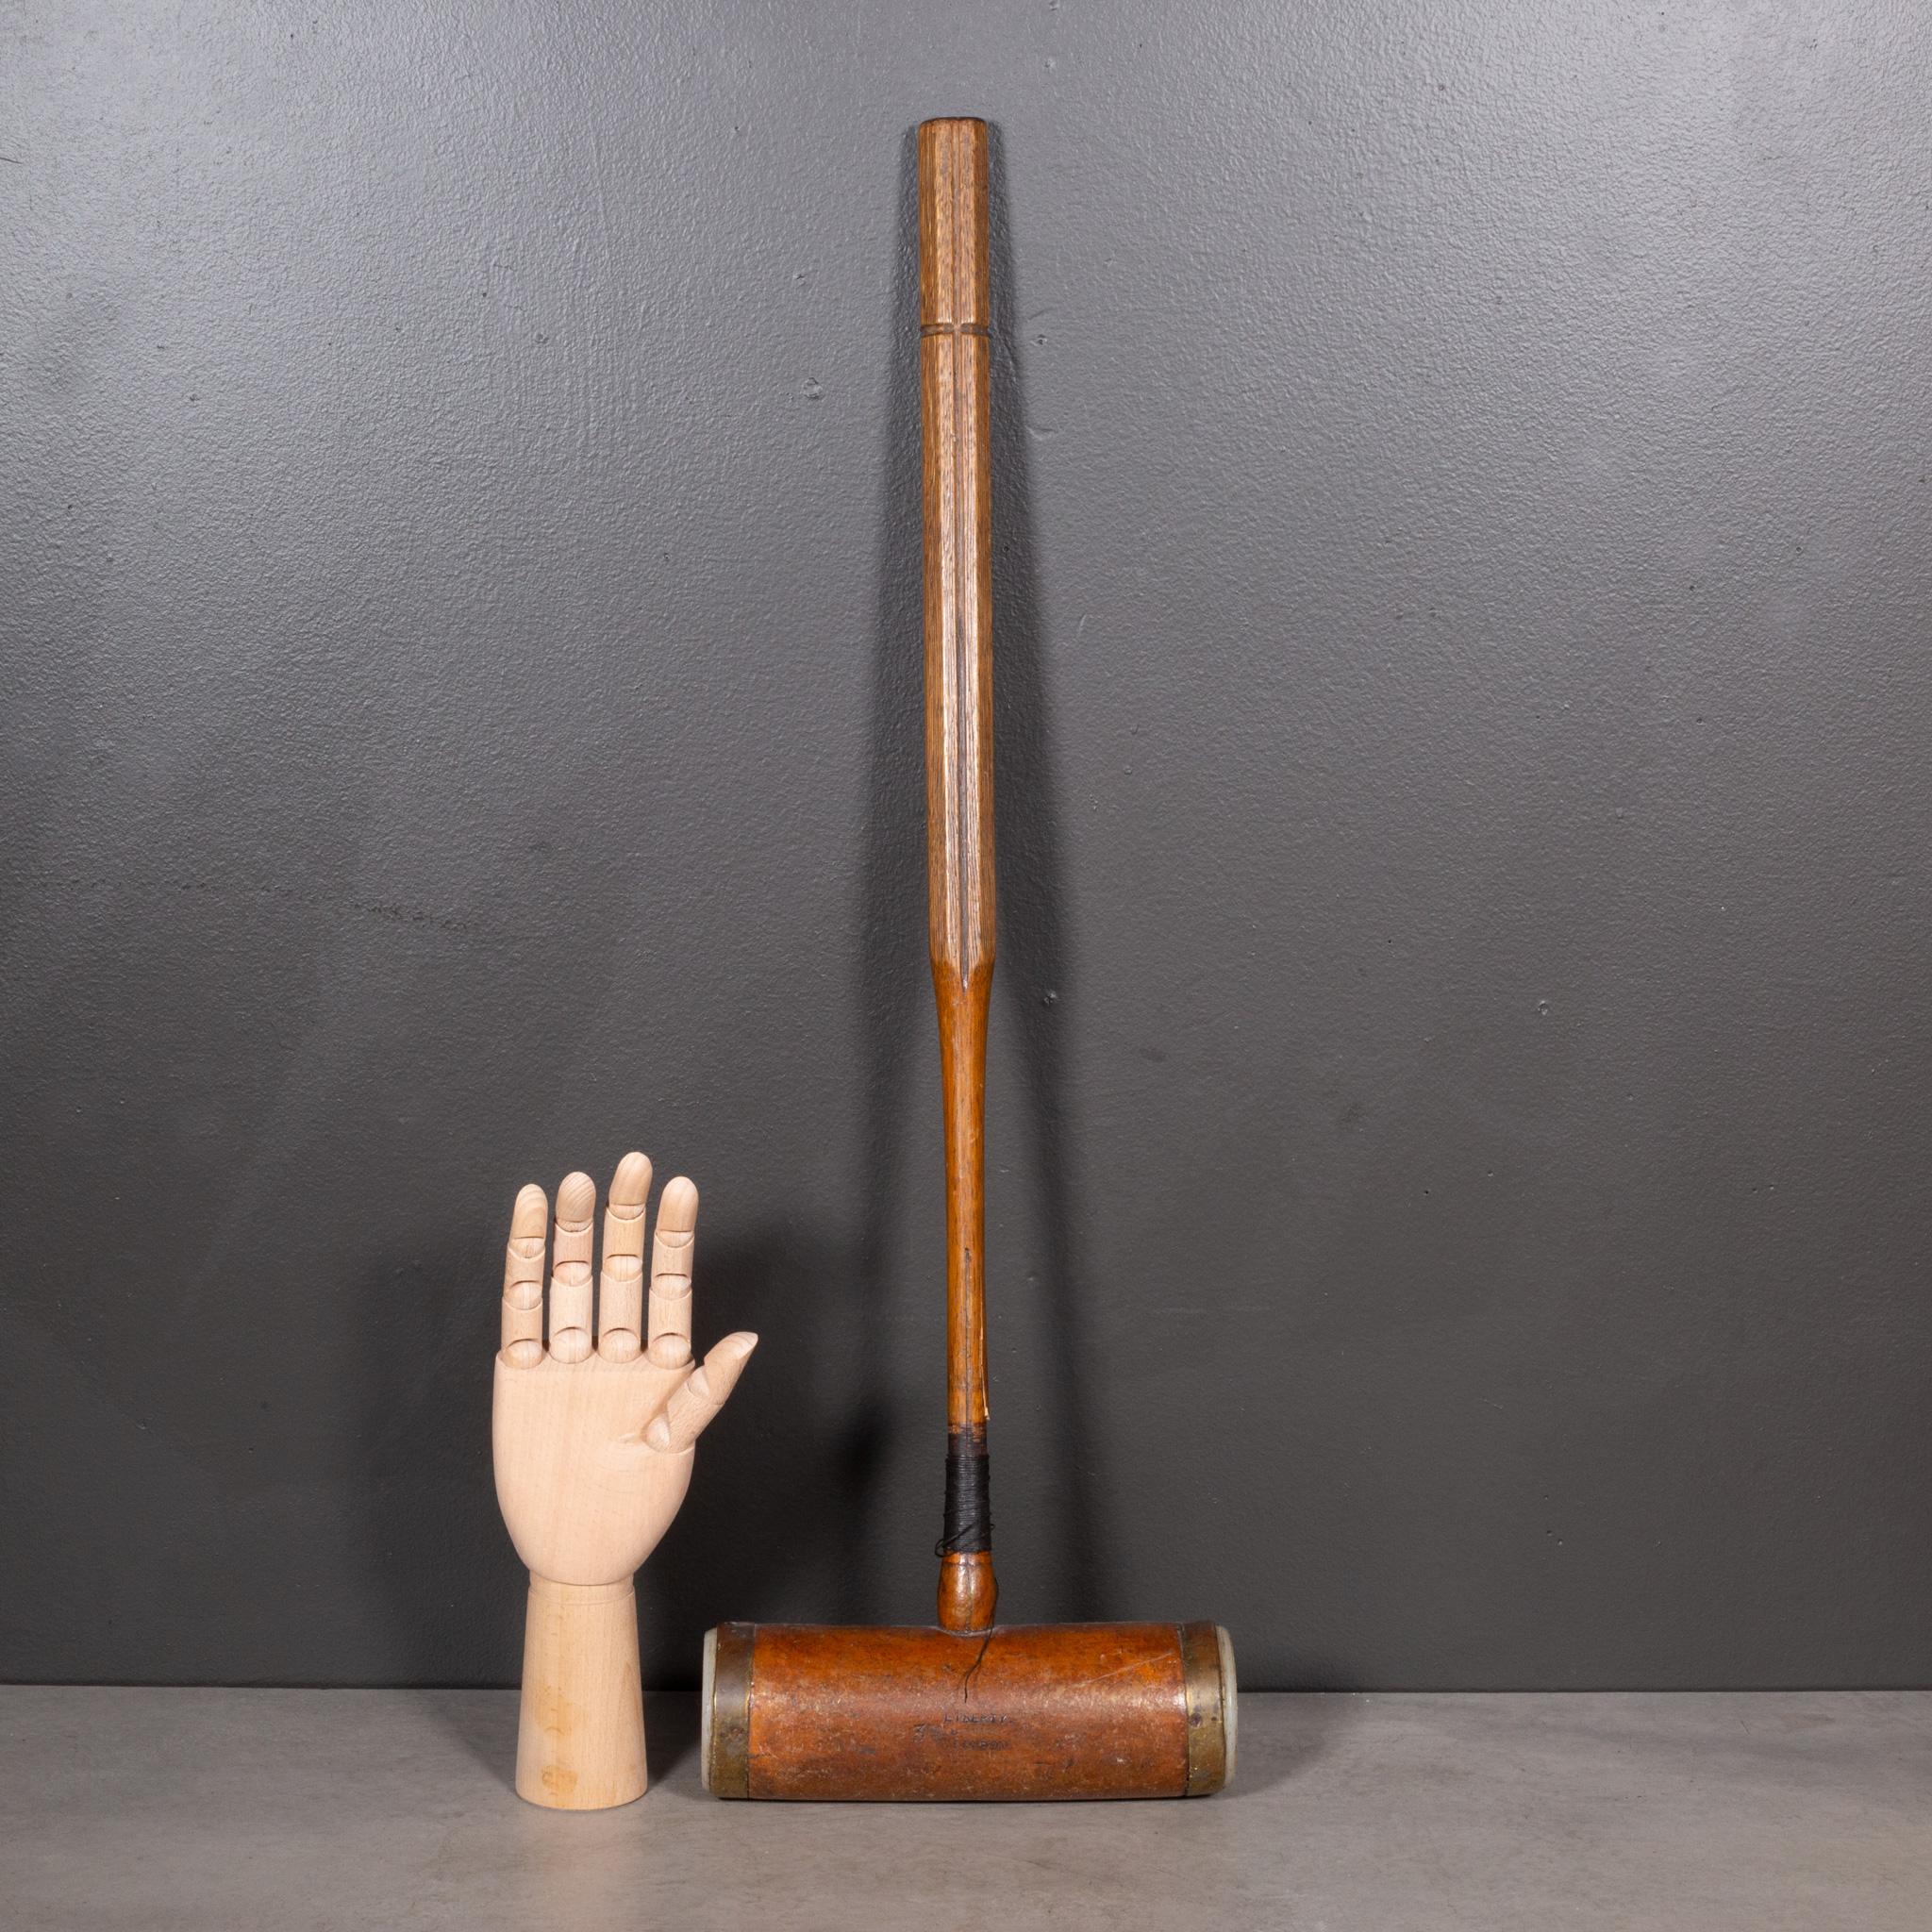 British Early 20th c. Engraved Croquet Mallet c.1920